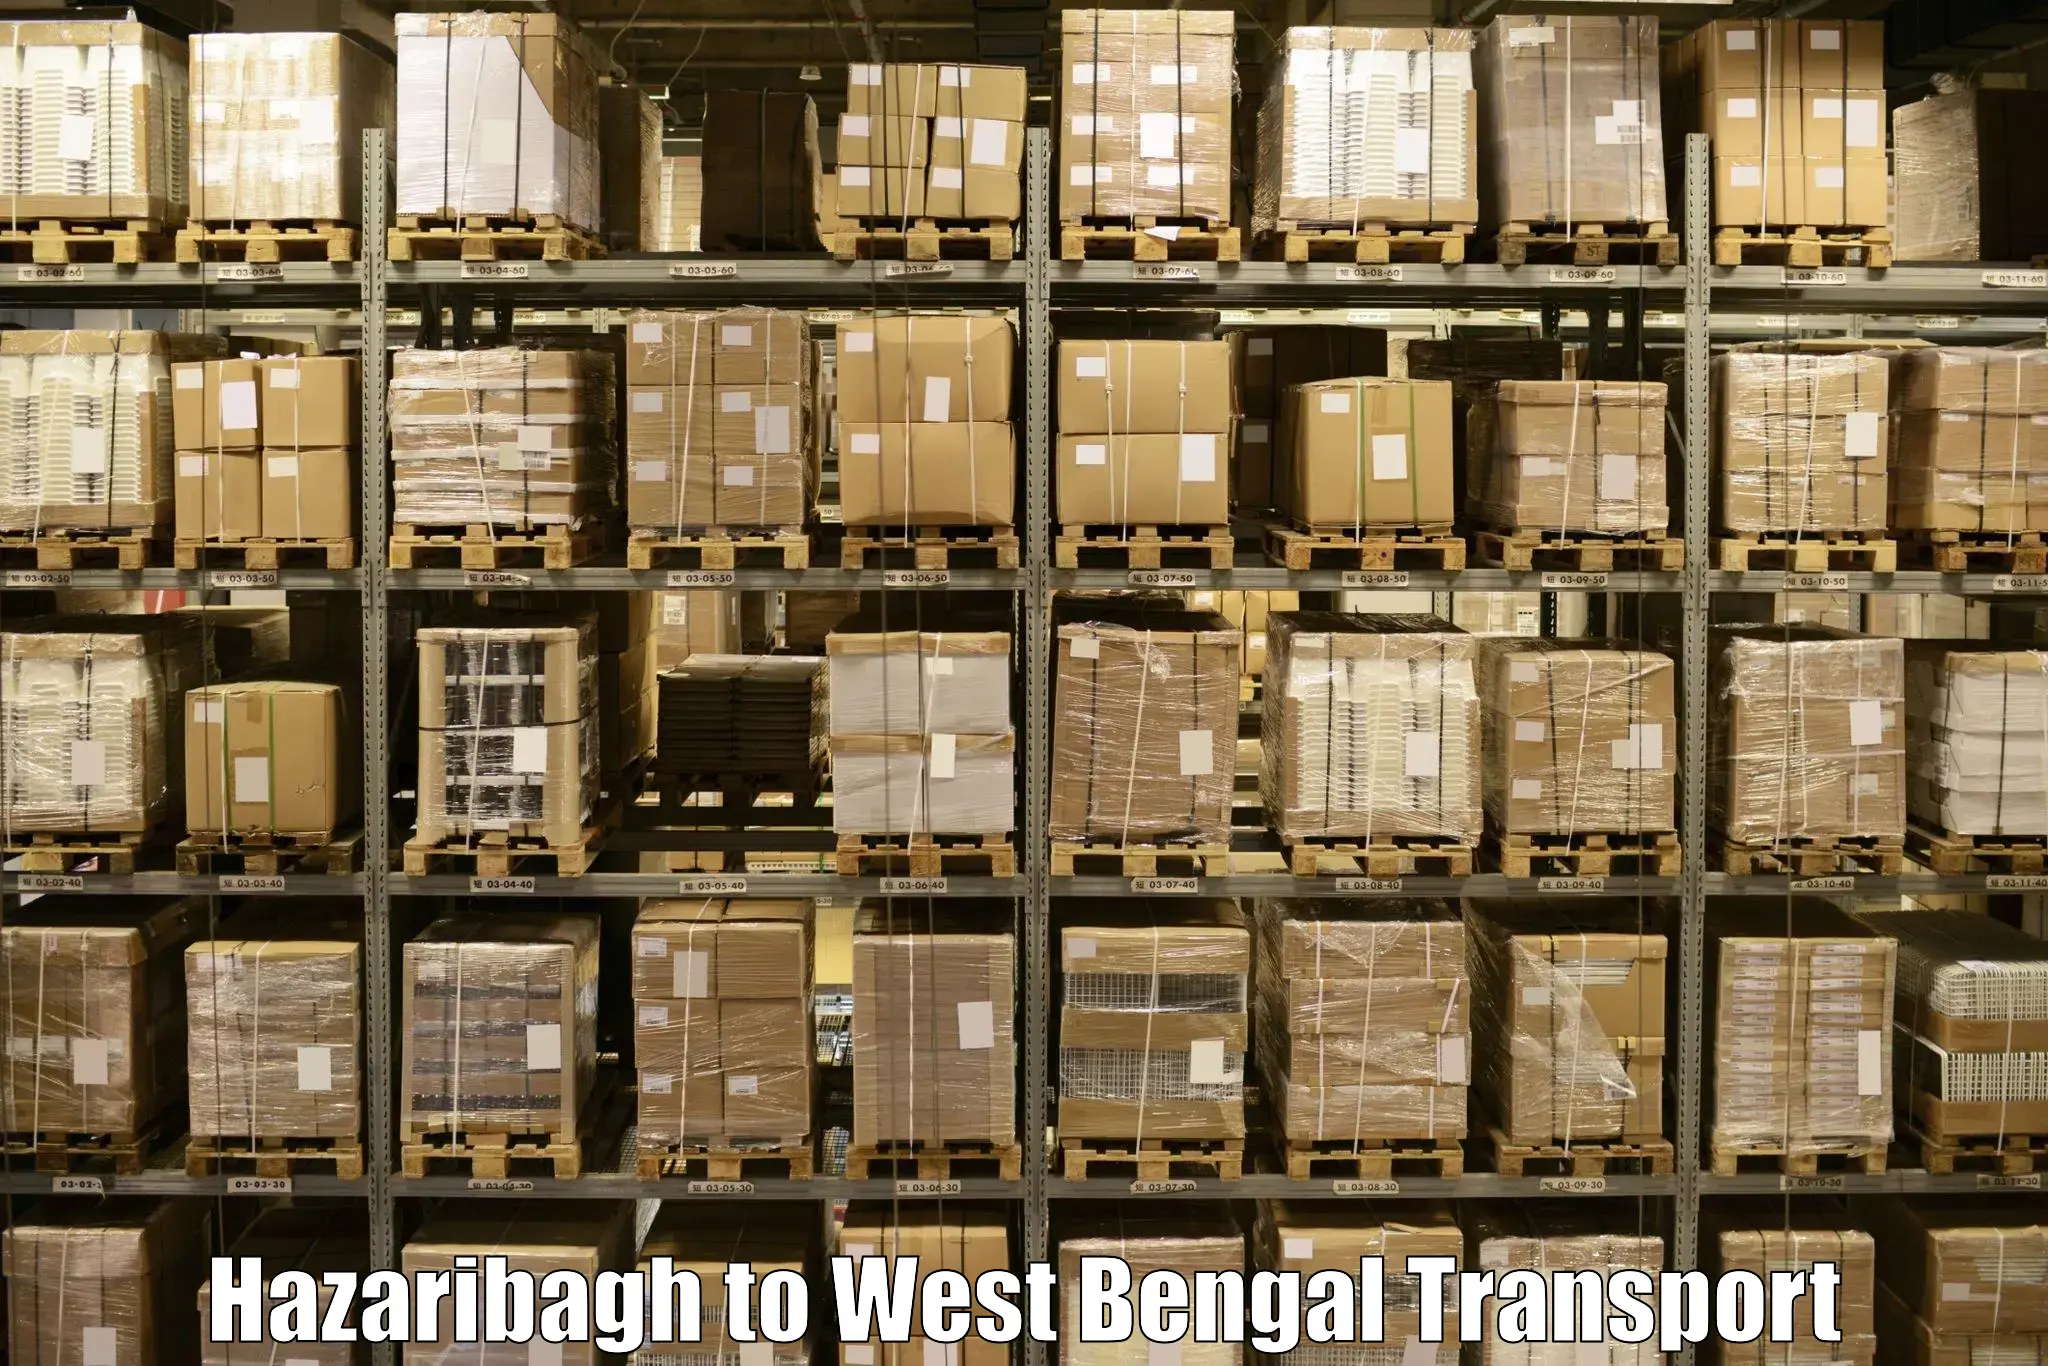 Daily transport service in Hazaribagh to West Bengal